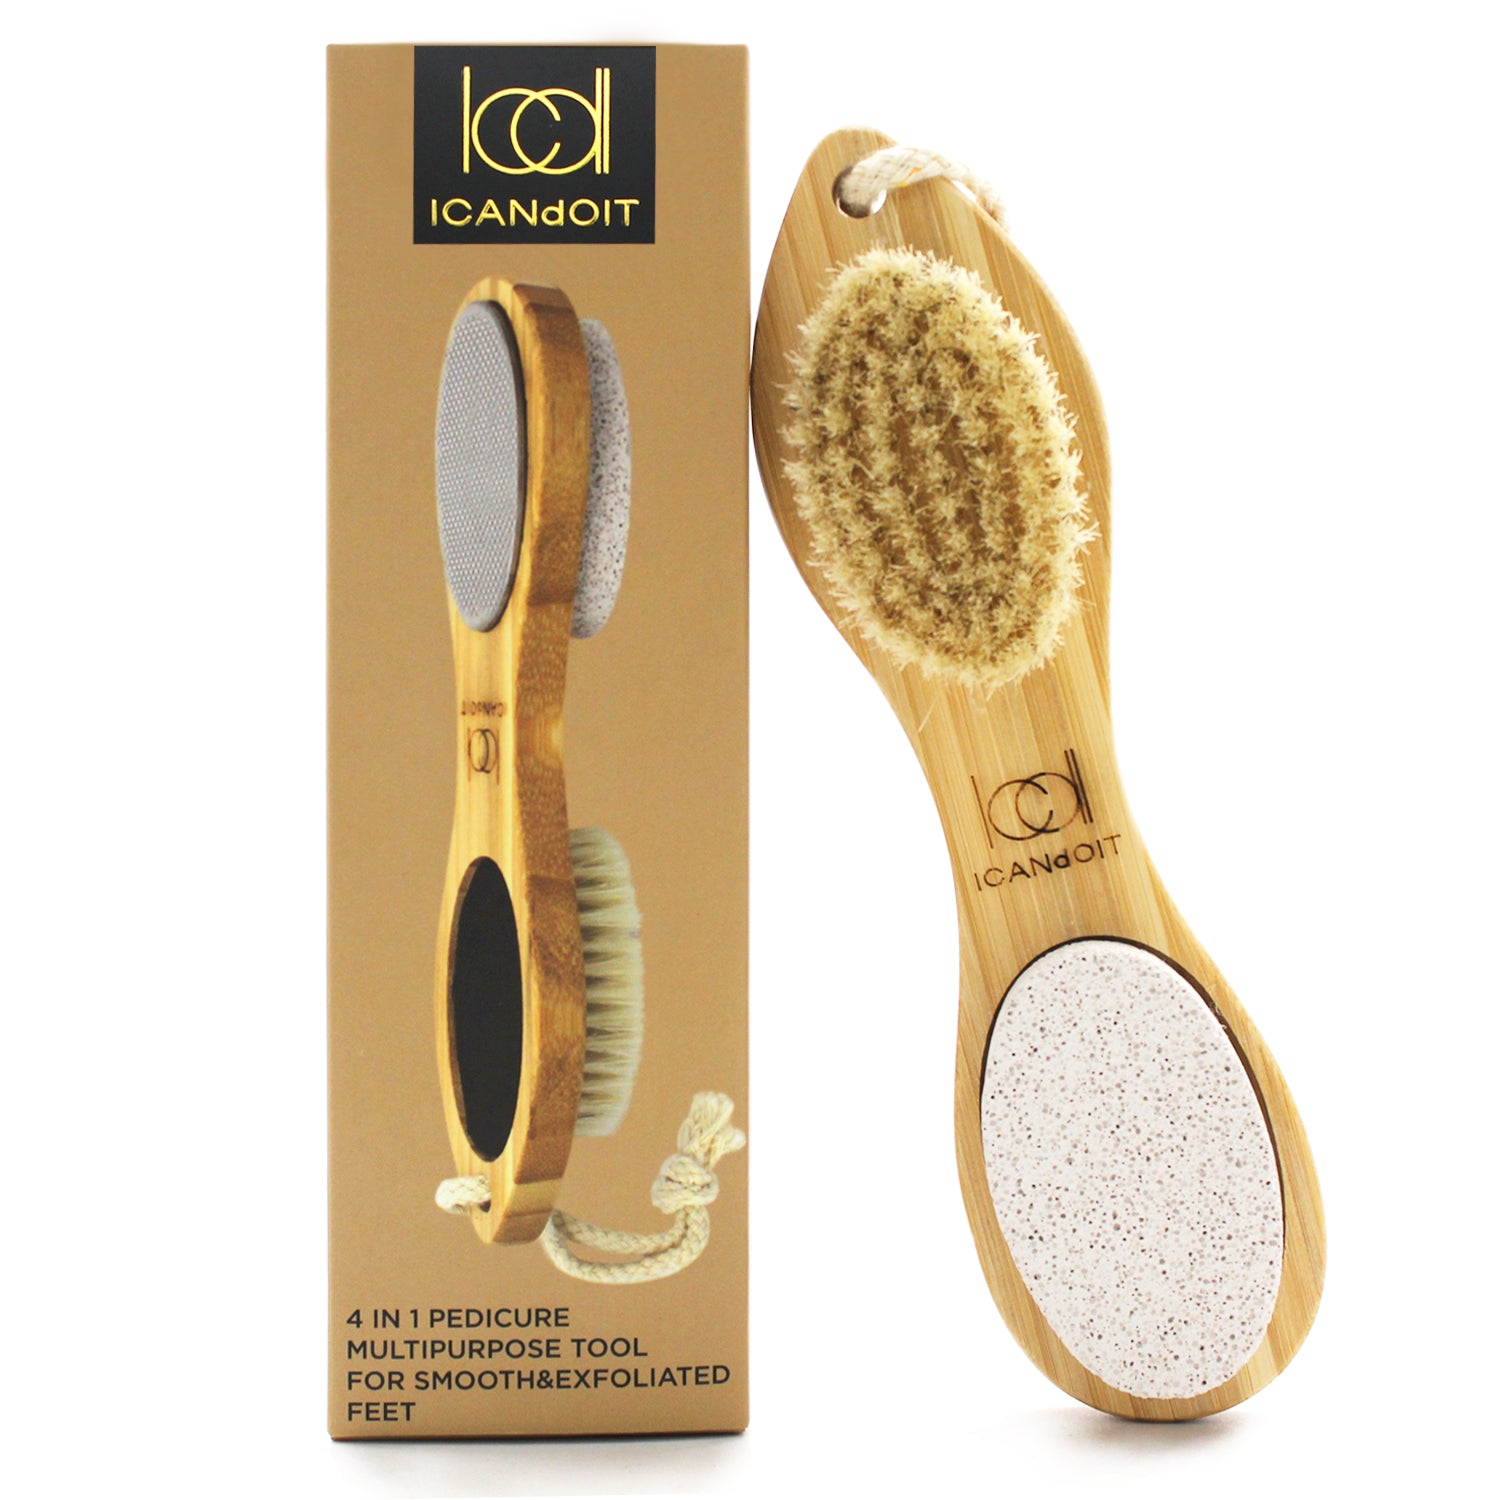 Beauty by Earth Foot File Callus Remover Home Pedicure Tool